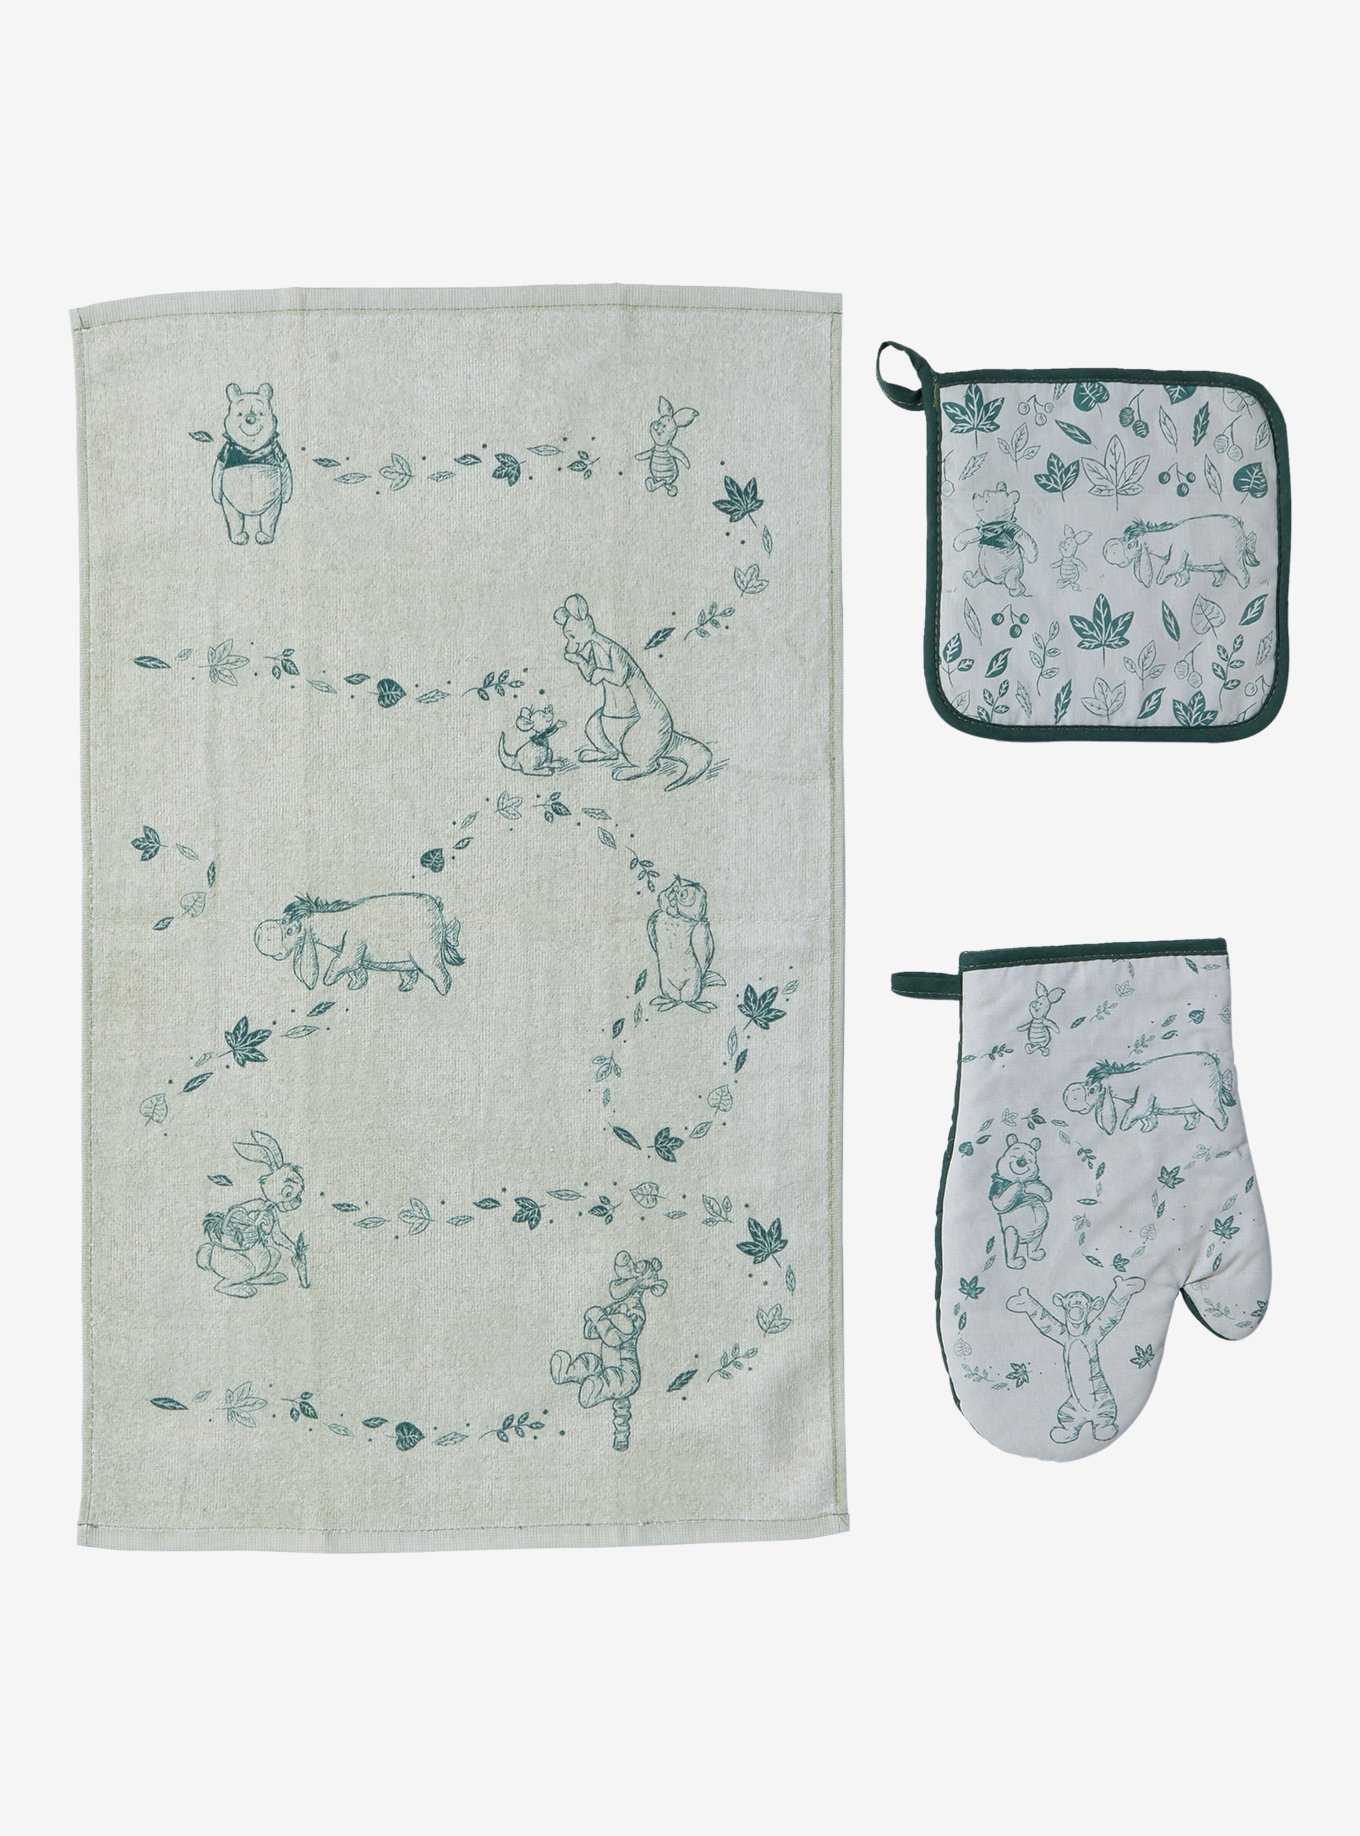 Disney Winnie the Pooh Characters & Plants Allover Print Kitchen Set - BoxLunch Exclusive, , hi-res